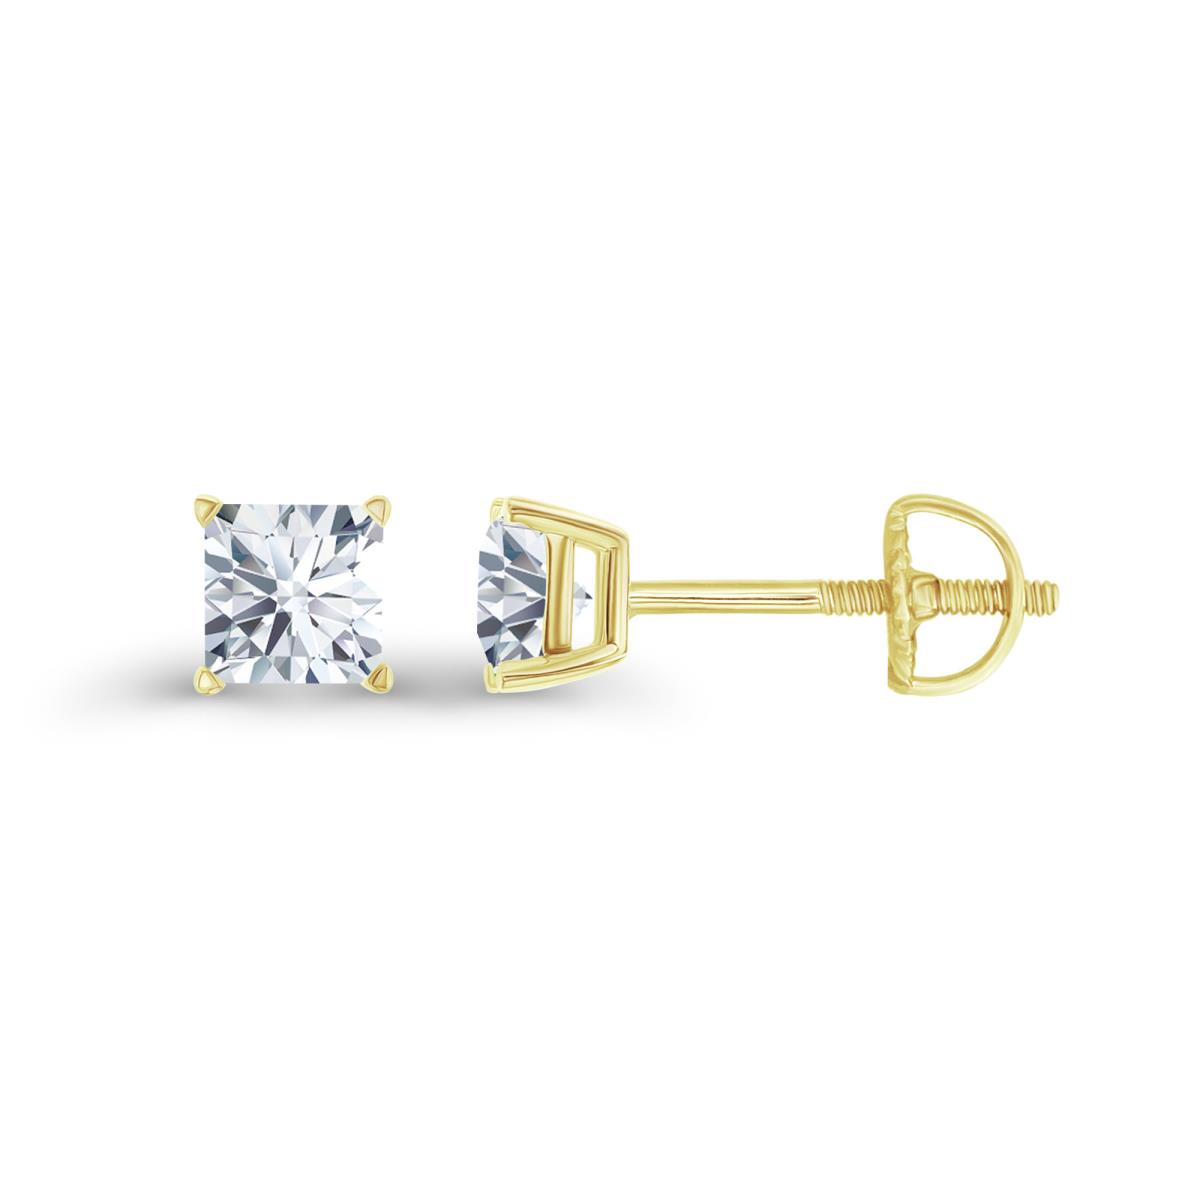 14K Yellow Gold 4mm Square Created White Sapphire Screwback Stud Earring